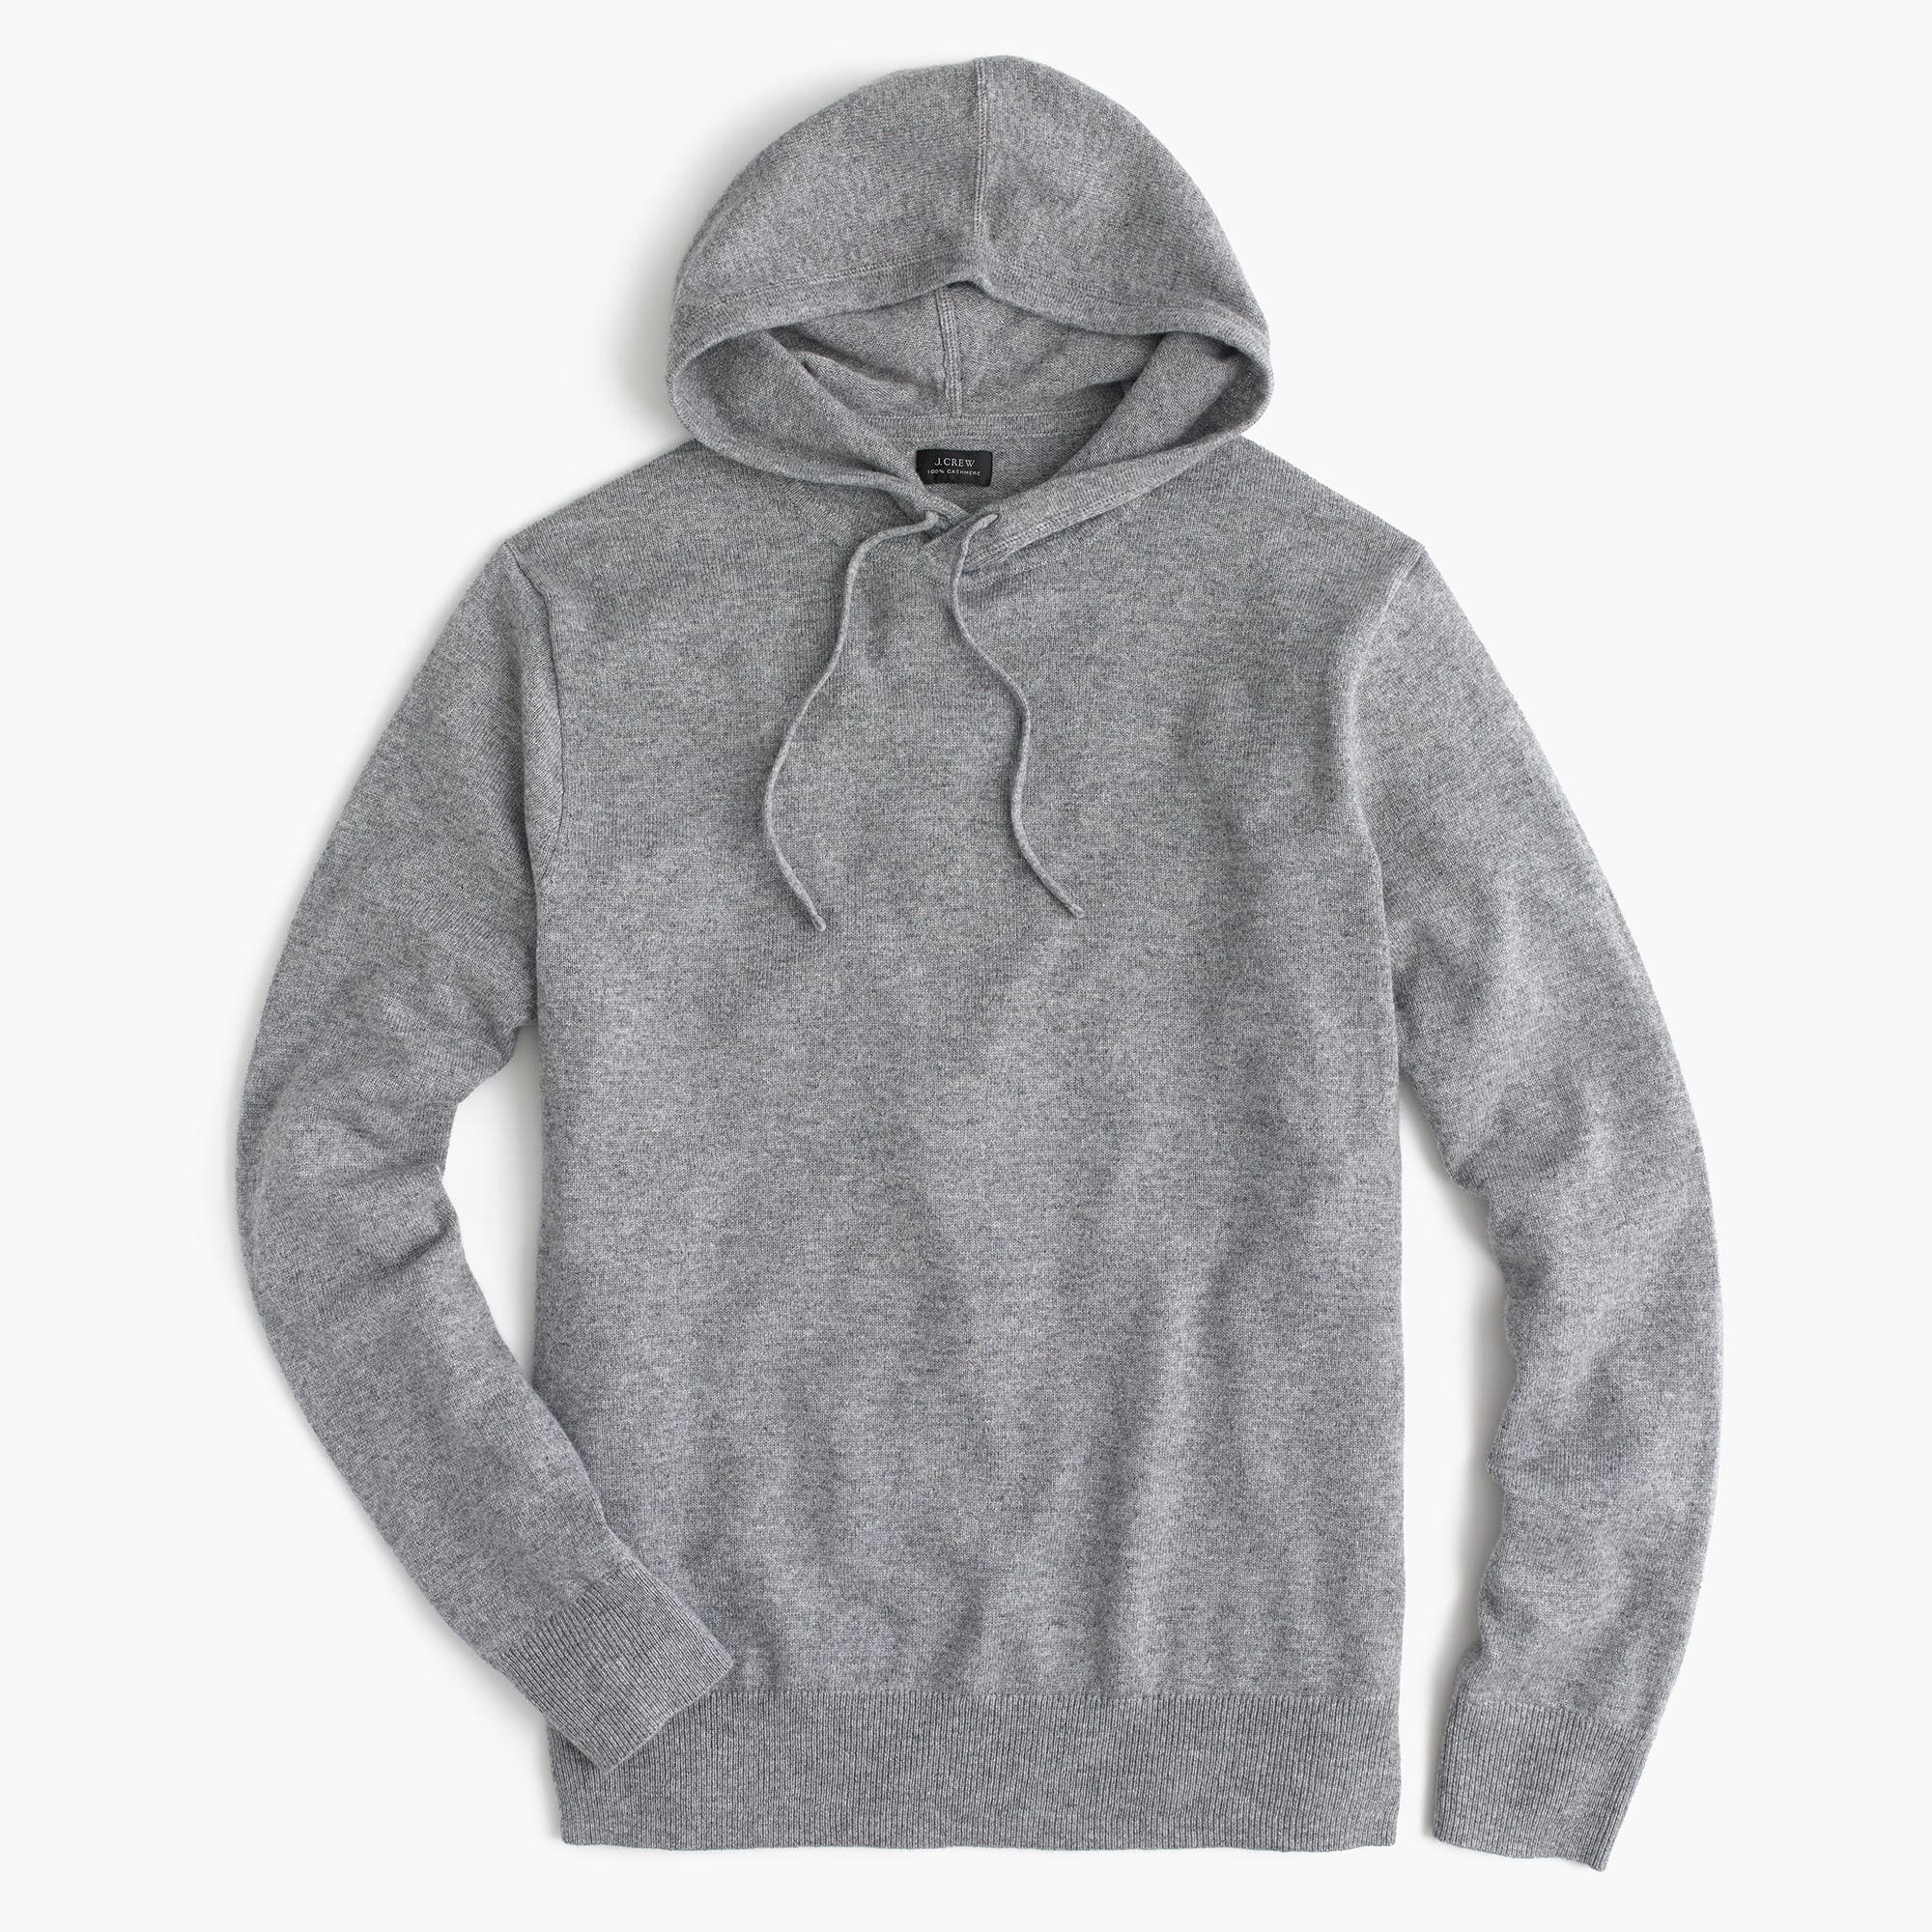 Gorgeous soft cashmere-cotton men's hoodie from JCrew | Coolest Men's Gifts | 2017 Holiday Gift Guide 